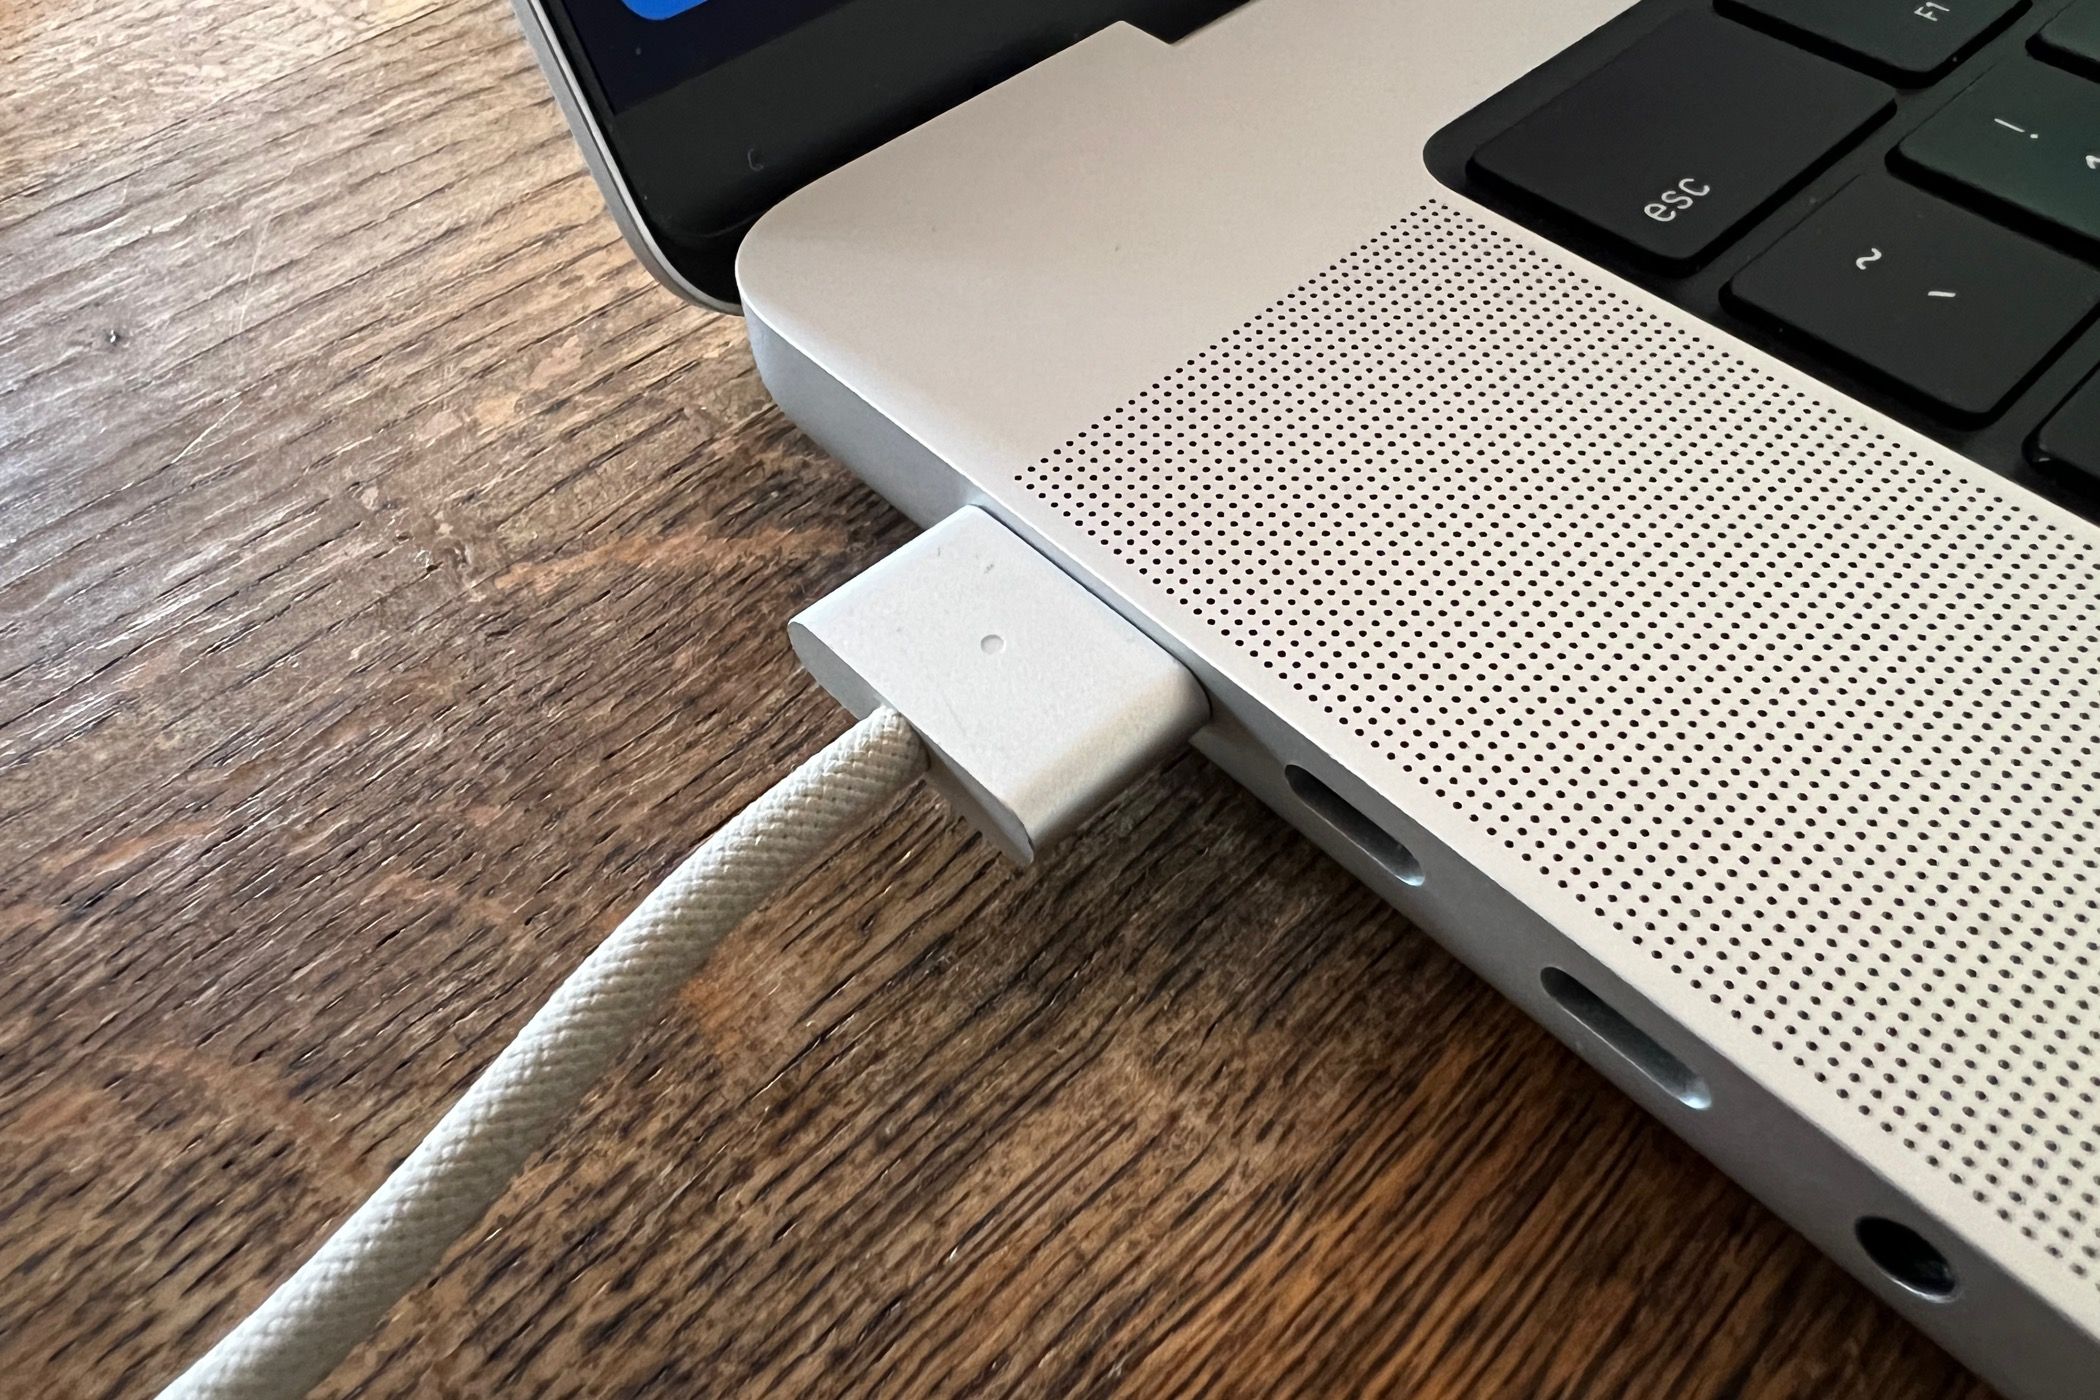 A MagSafe adapter that's plugged in but not switched on